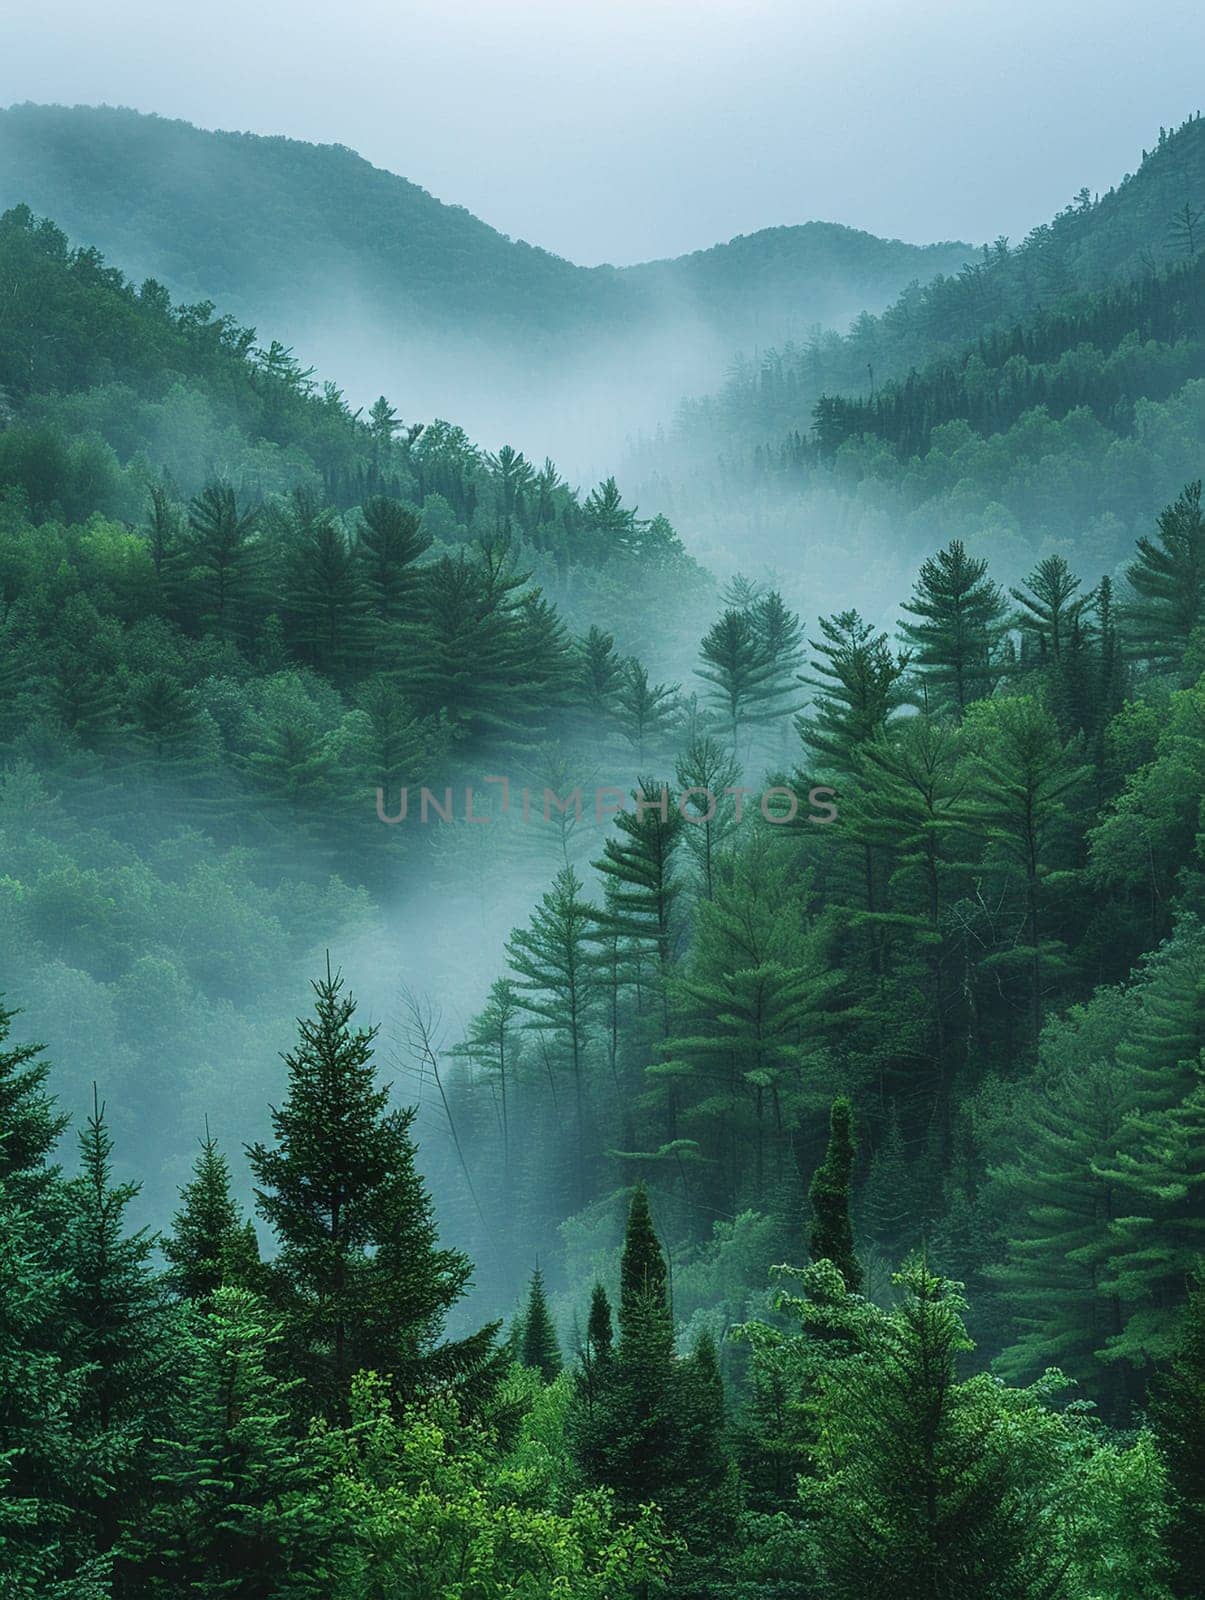 Early morning fog enveloping a forest, creating a mysterious and ethereal landscape